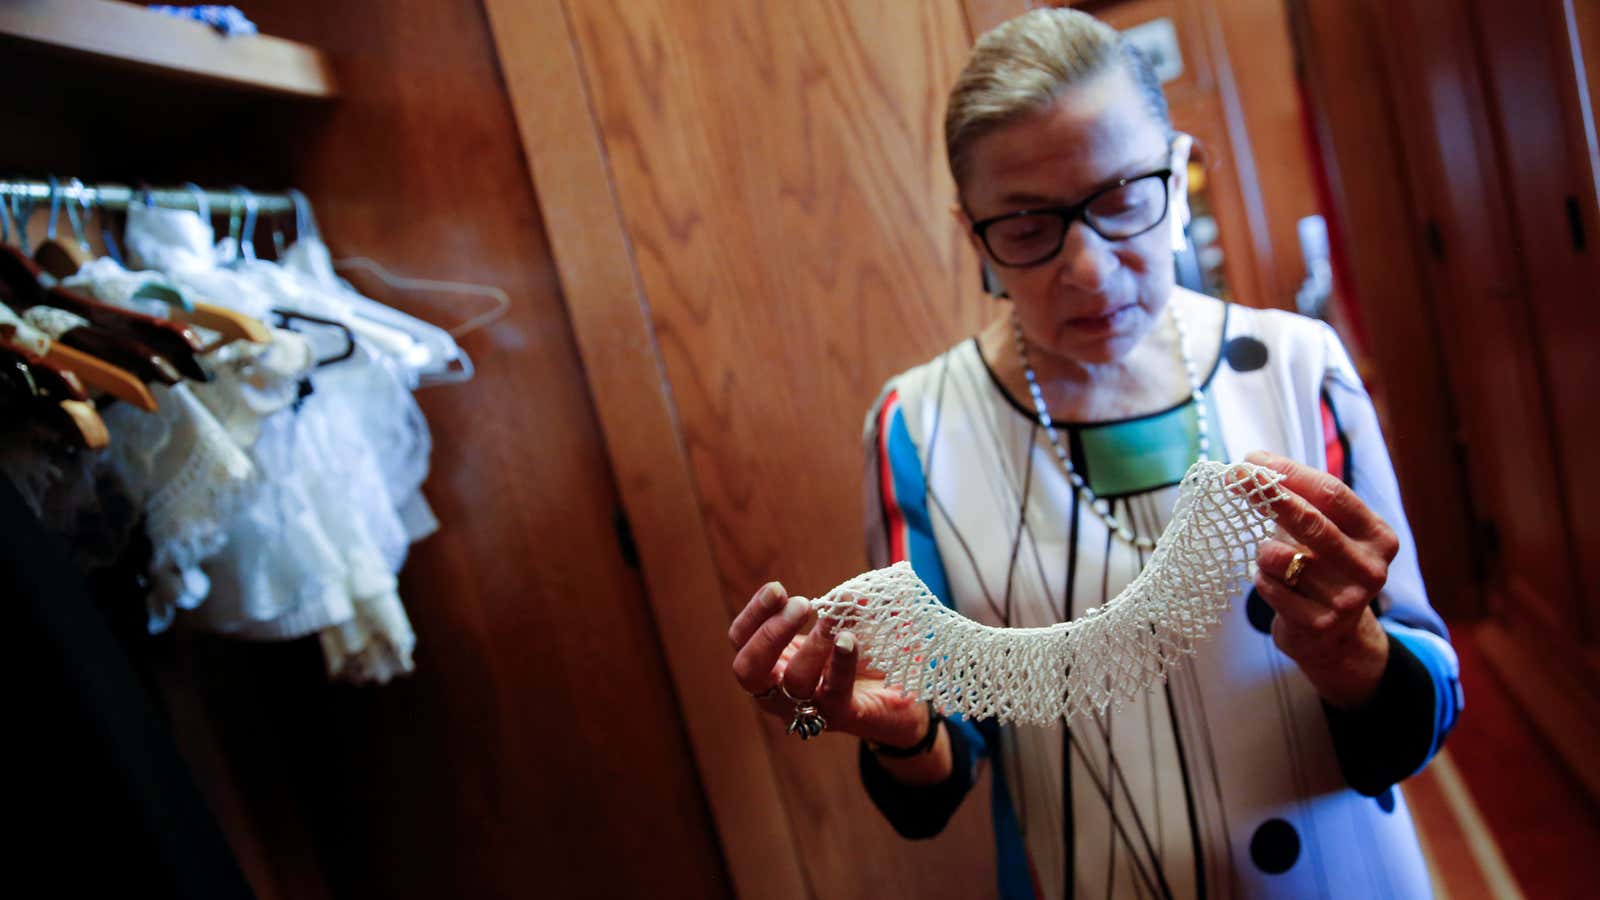 US Supreme Court Justice Ruth Bader Ginsburg shows her favorite collars (jabots) which got from Cape Town, South Africa. She wore them with her robes (June 17, 2016).